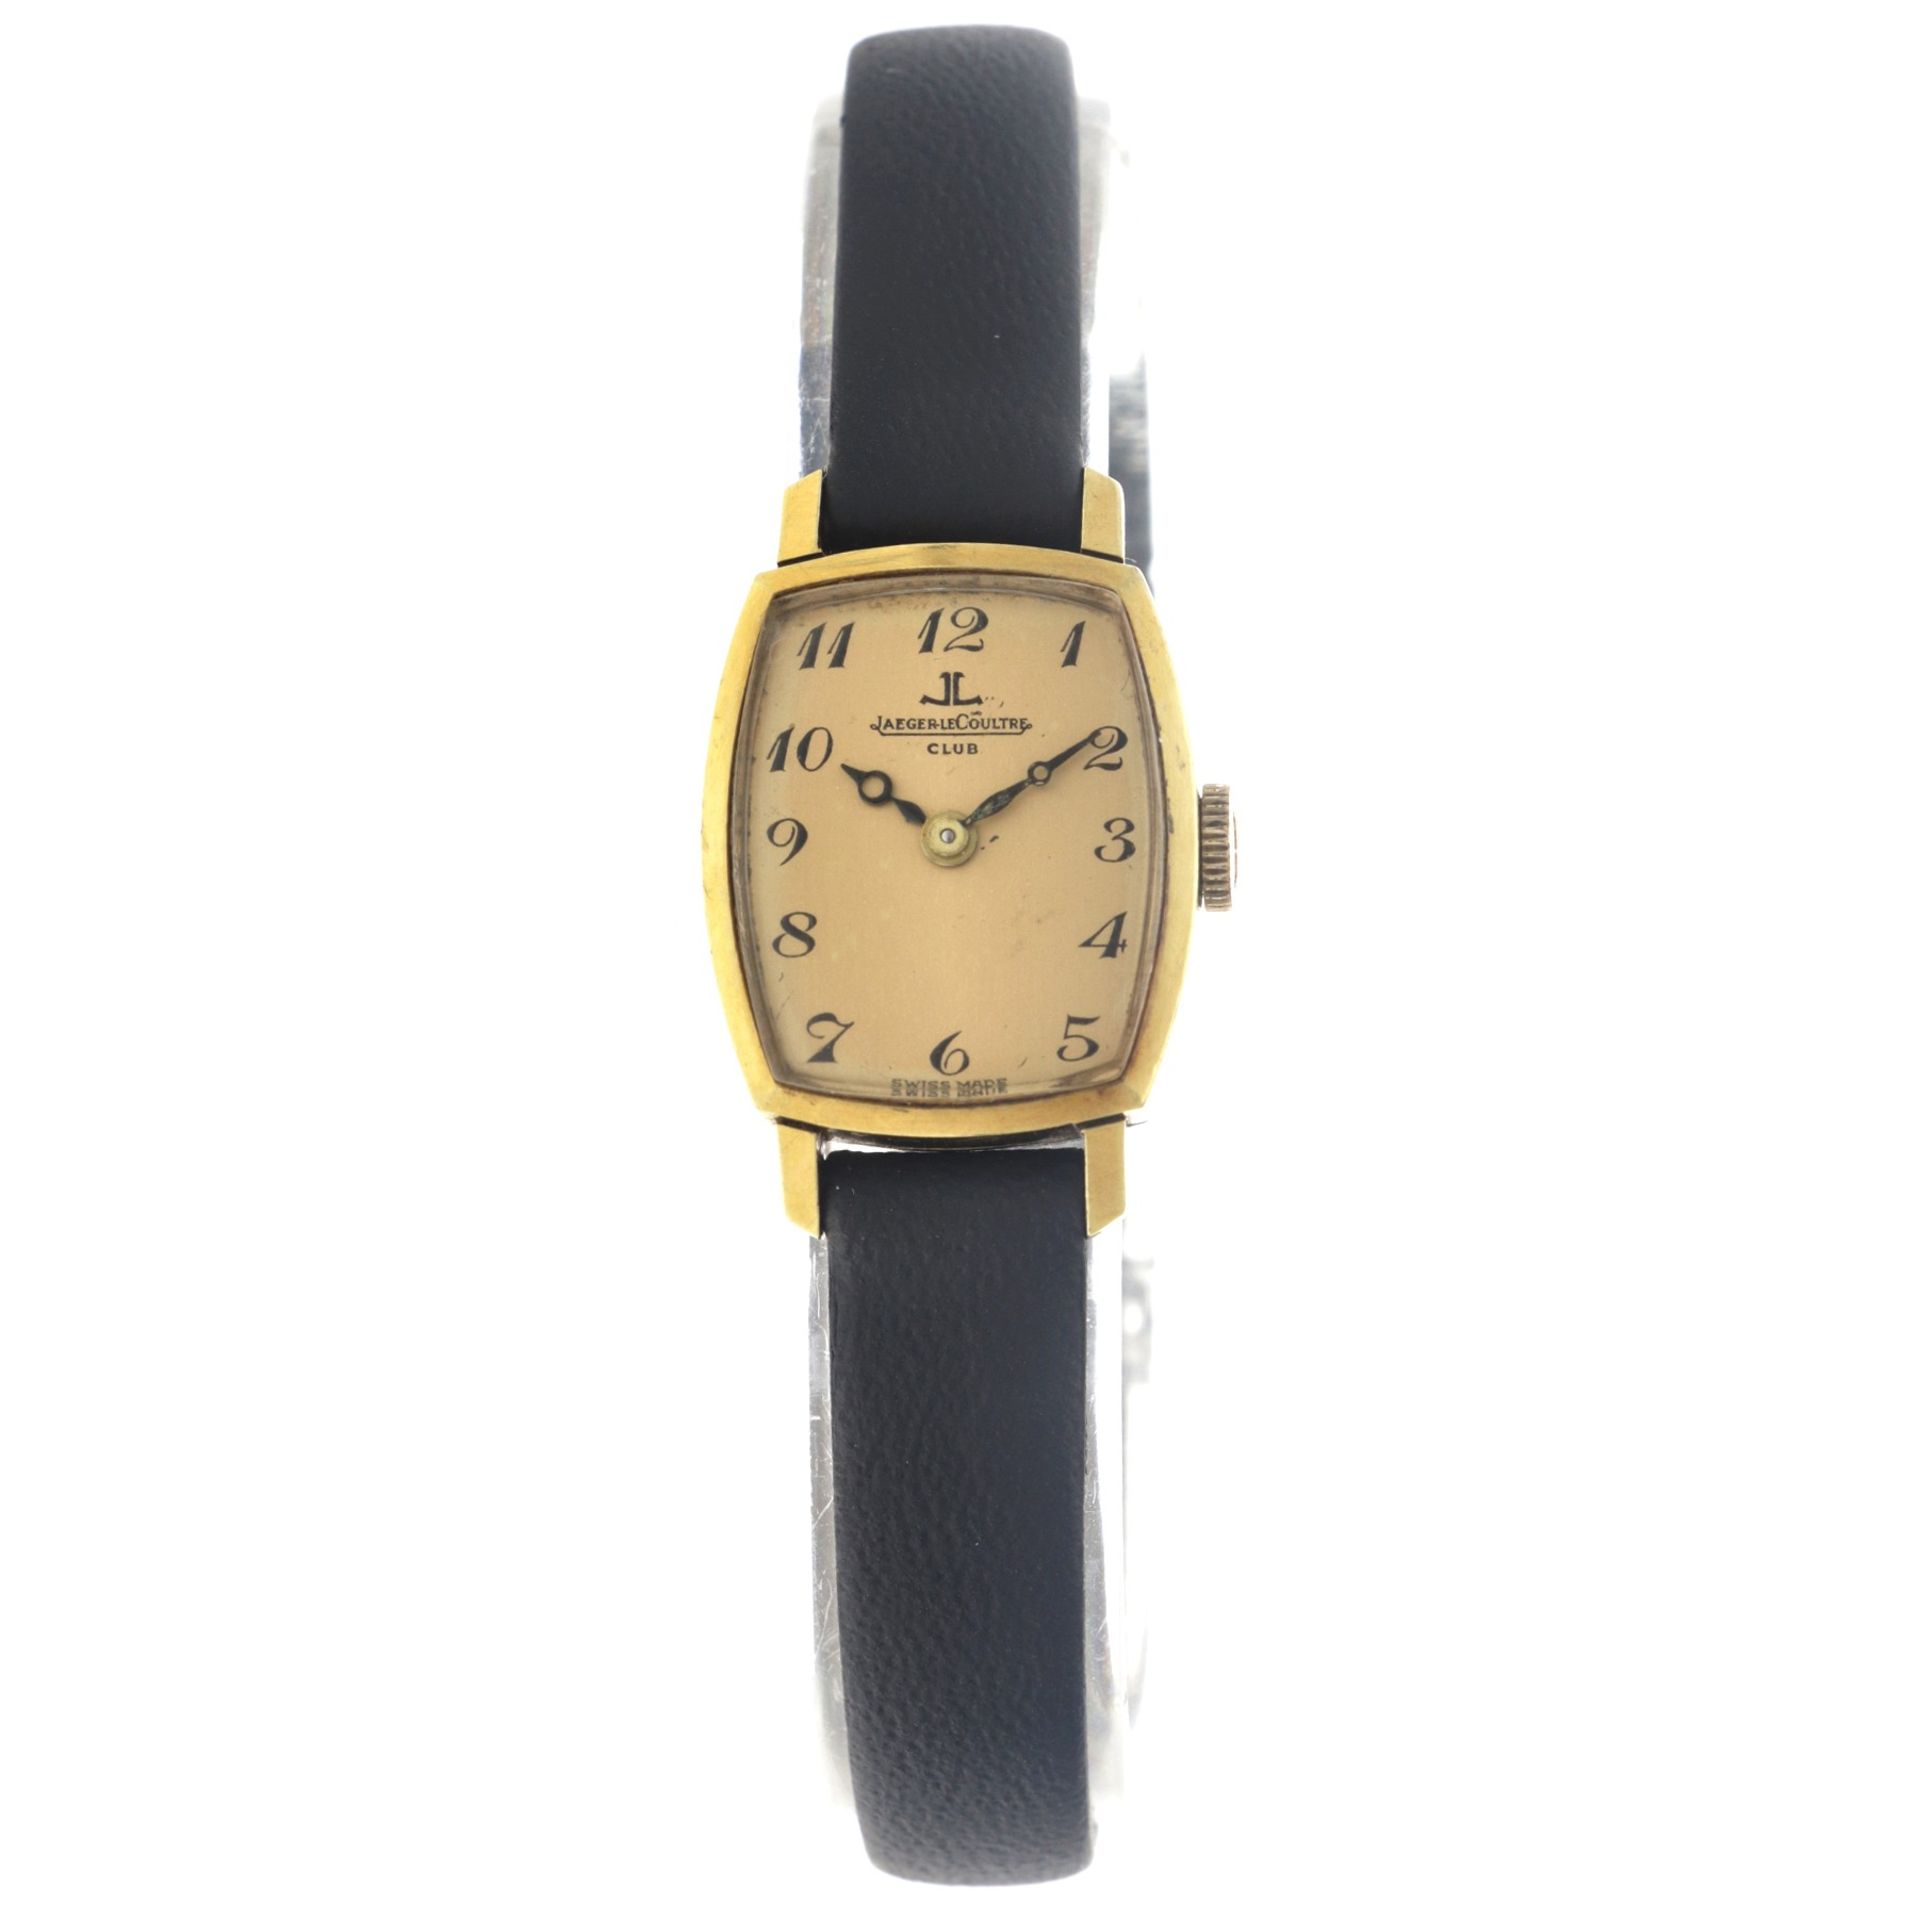 No reserve - Jaeger-LeCoultre Club Lady 100406 - Ladies watch 